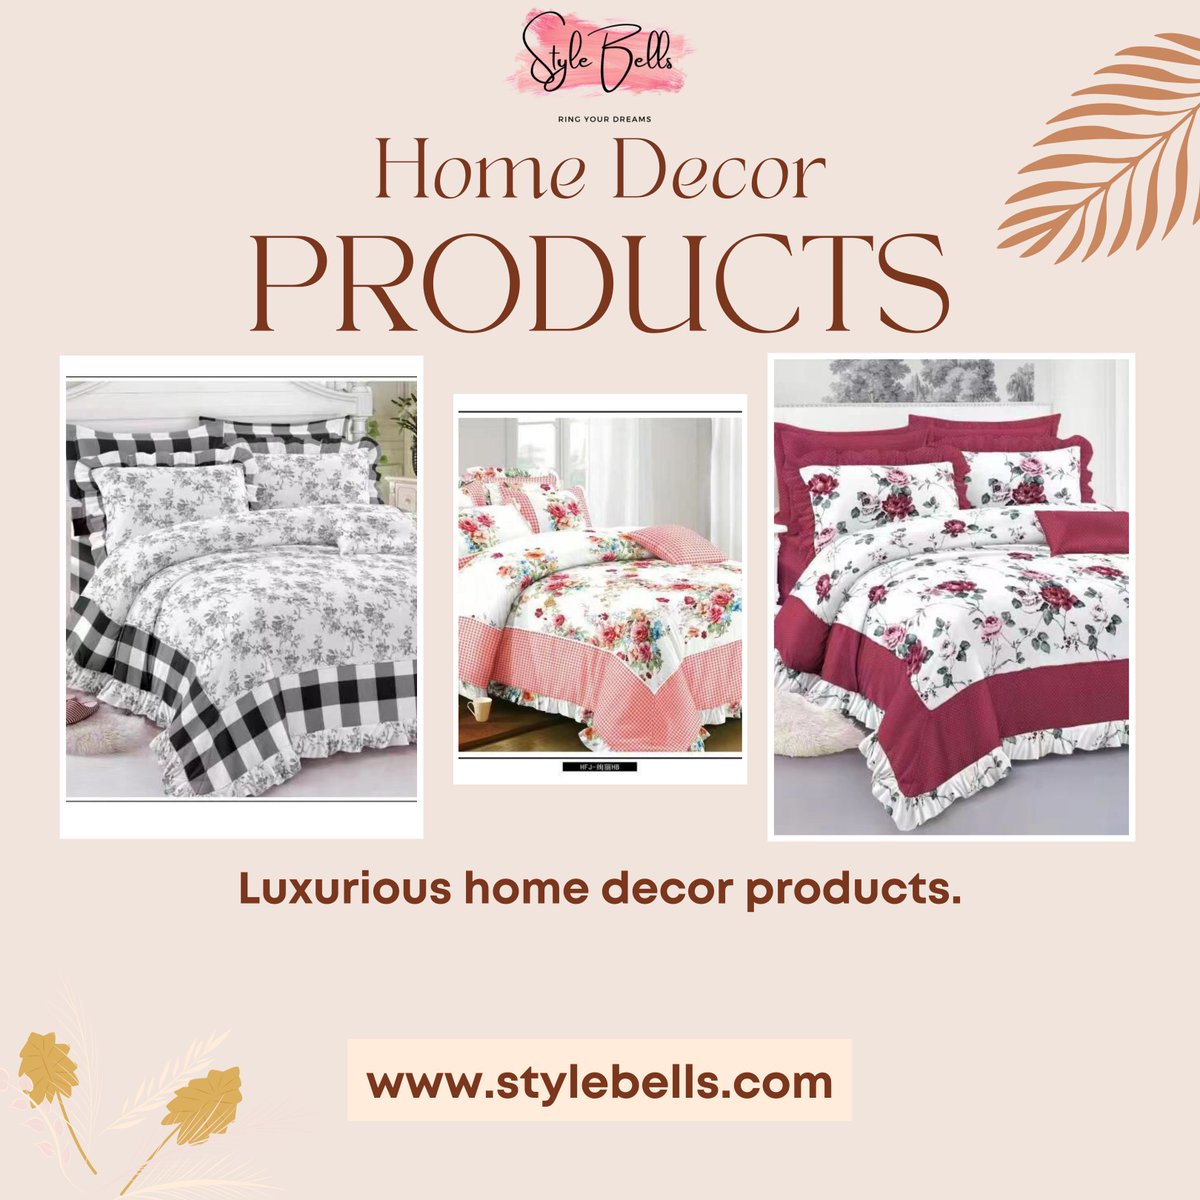 Buy Home Decor Products at an Affordable Prices.
Buy Now : stylebells.com
#stylebells #panipathandloom #homedecor #homedecoration #homedecorating #homedecore #homedecorations #homedecorideas #homedecorlovers #homedecorblogger #homedecors #homedecorator #homedecorinspo